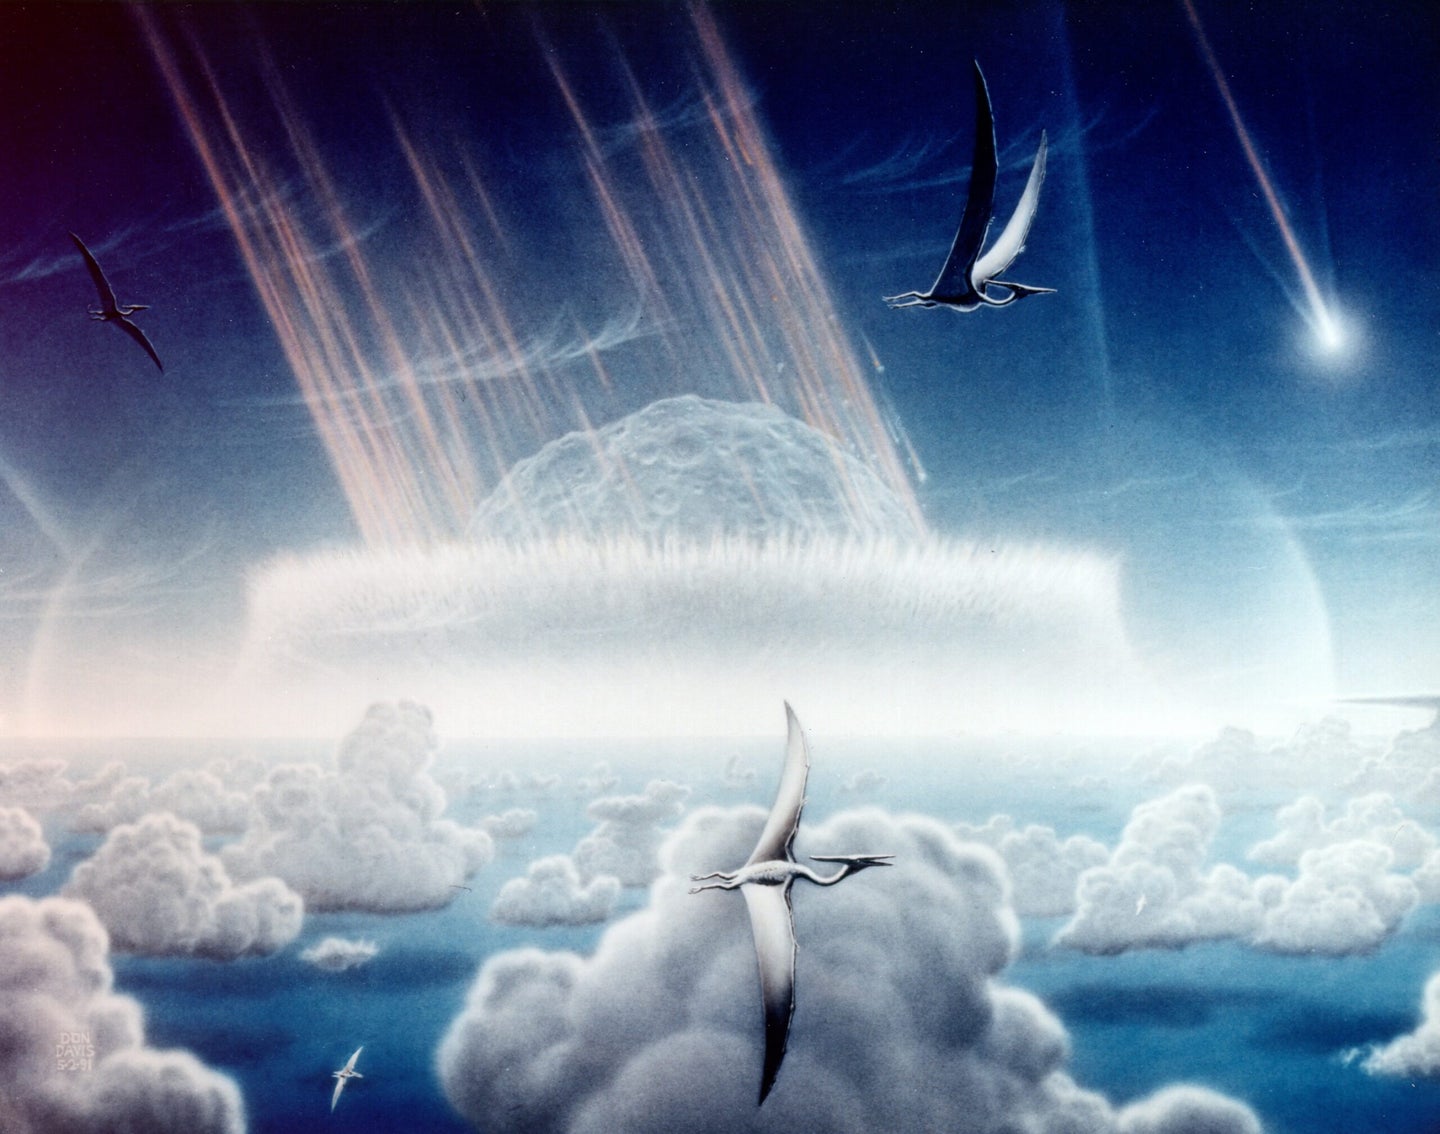 Asteroid that killed the dinosaurs striking Earth. Illustration.